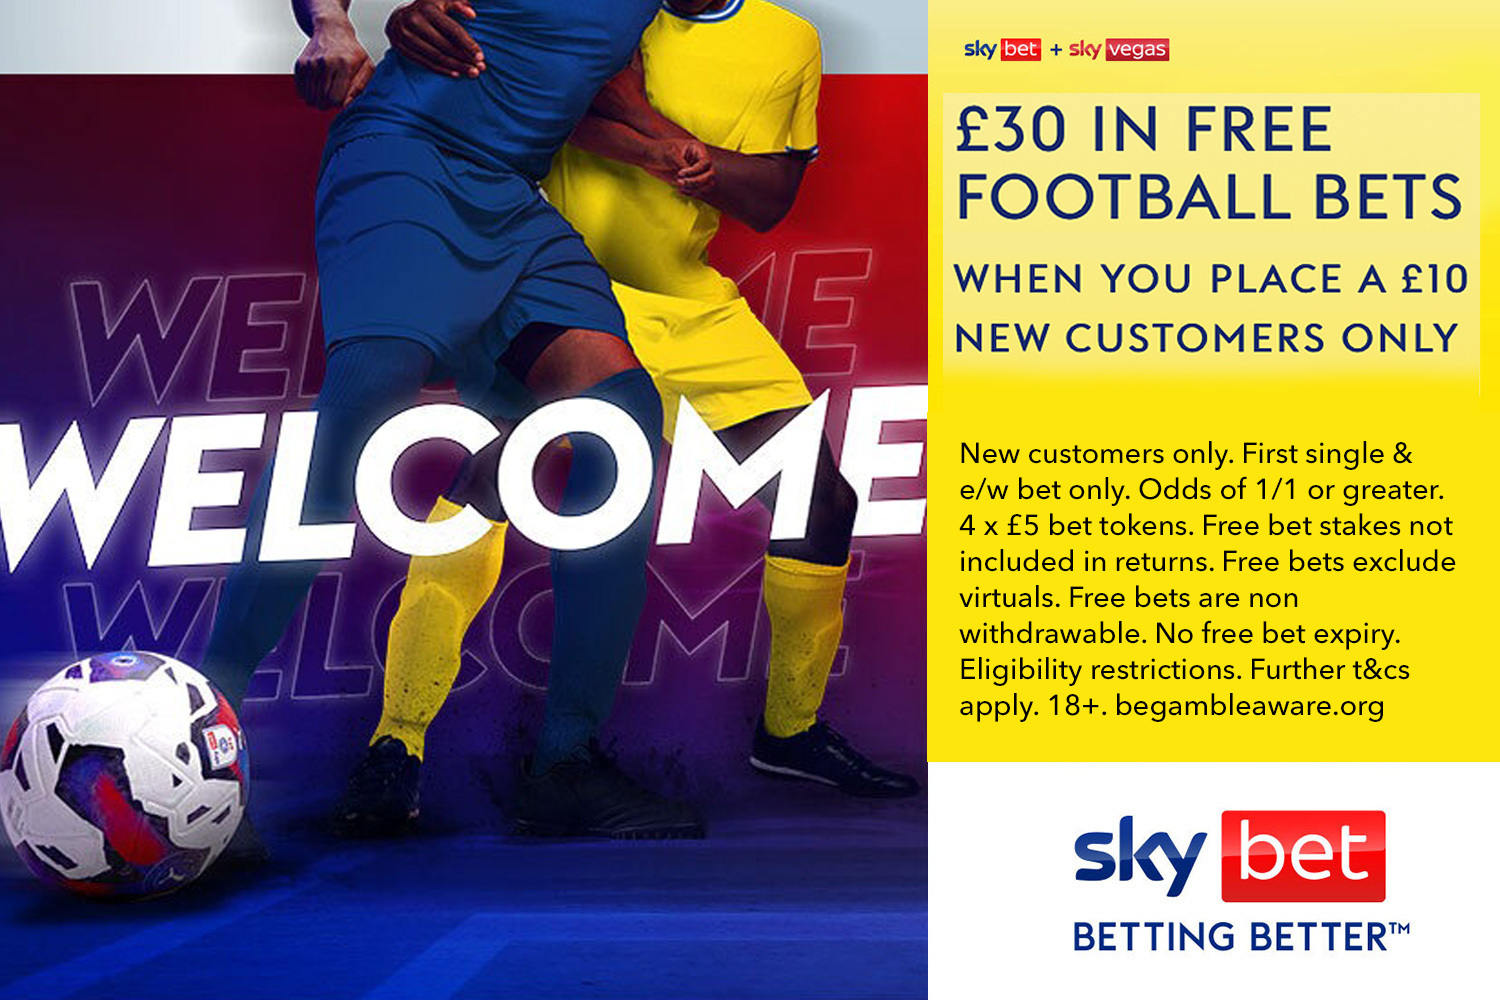 Arsenal v PSV offer: Bet £10 and get £30 in free bets with Sky Bet